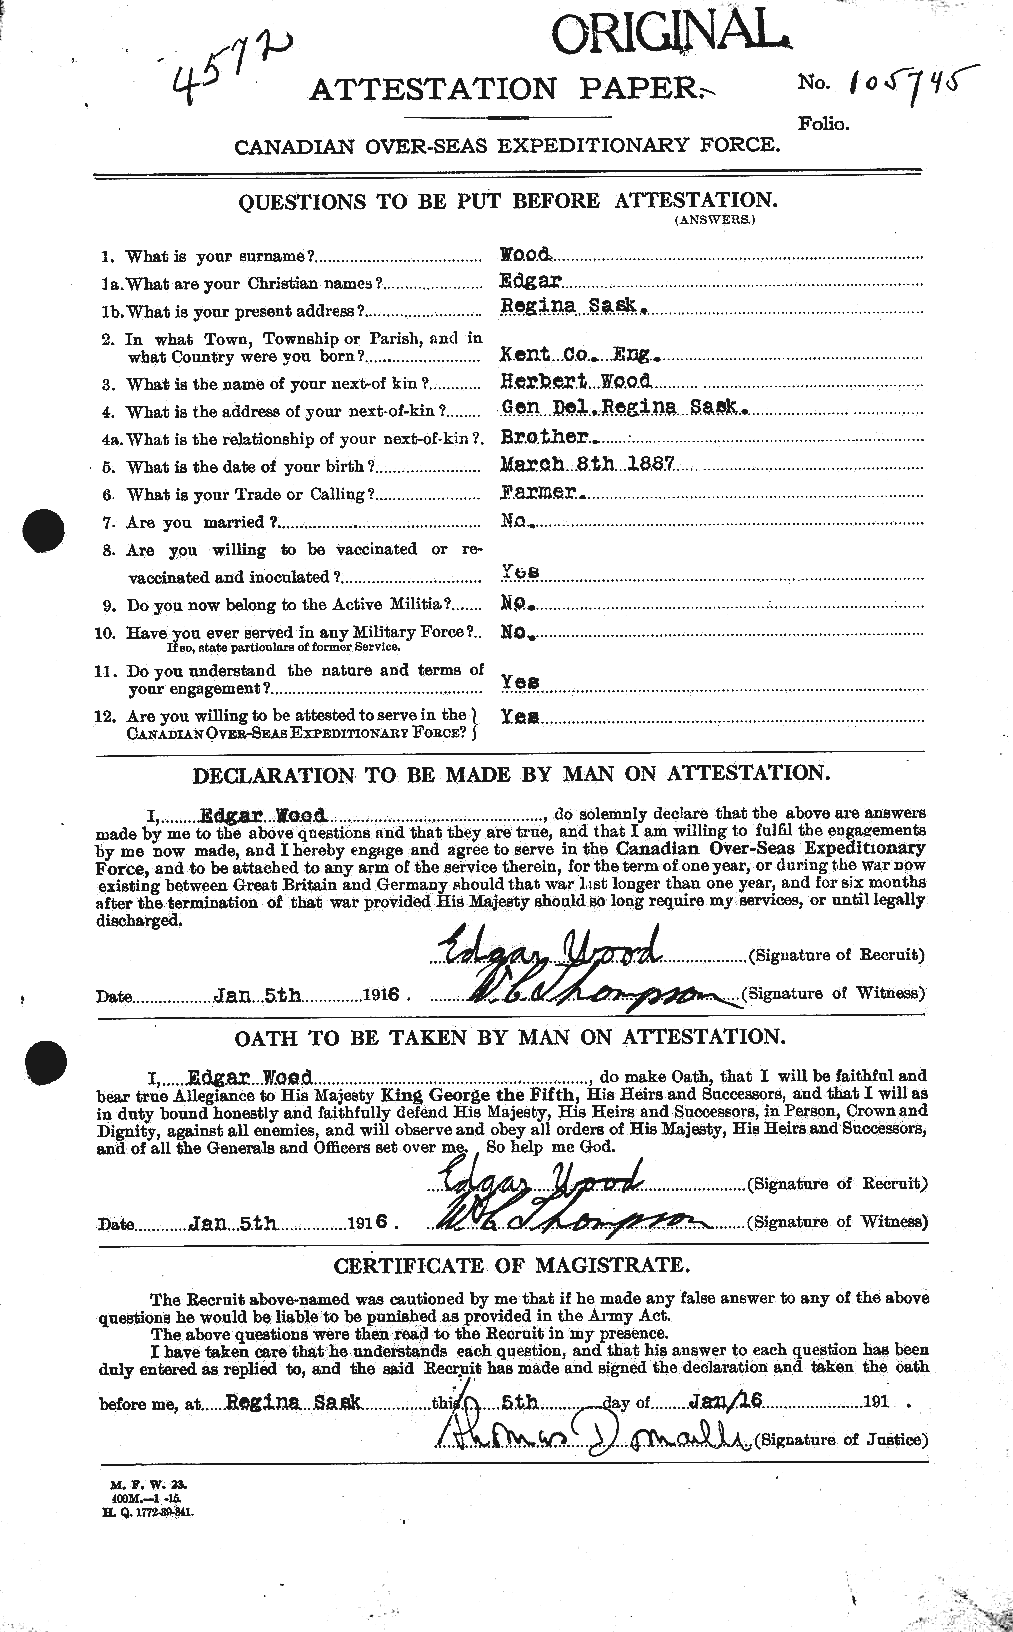 Personnel Records of the First World War - CEF 682973a